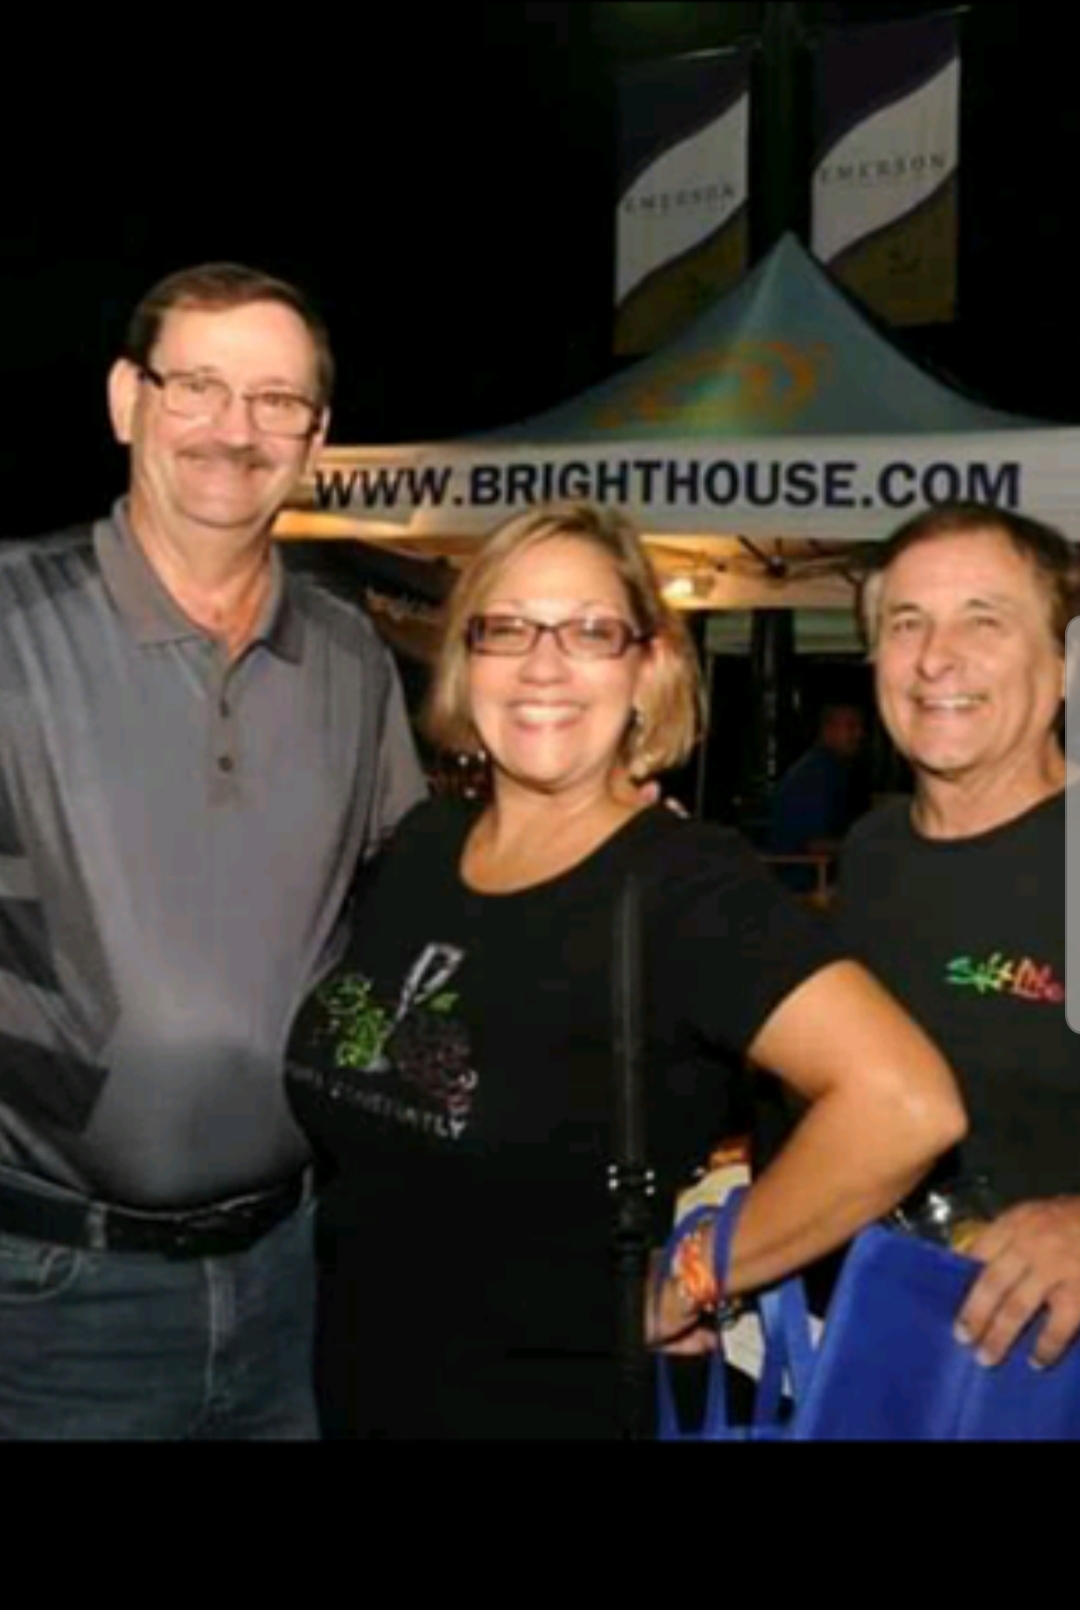 Good times  <br />
 At the Latin food festival at crane's roost 2013. You will be dearly missed every day my friend. RIP